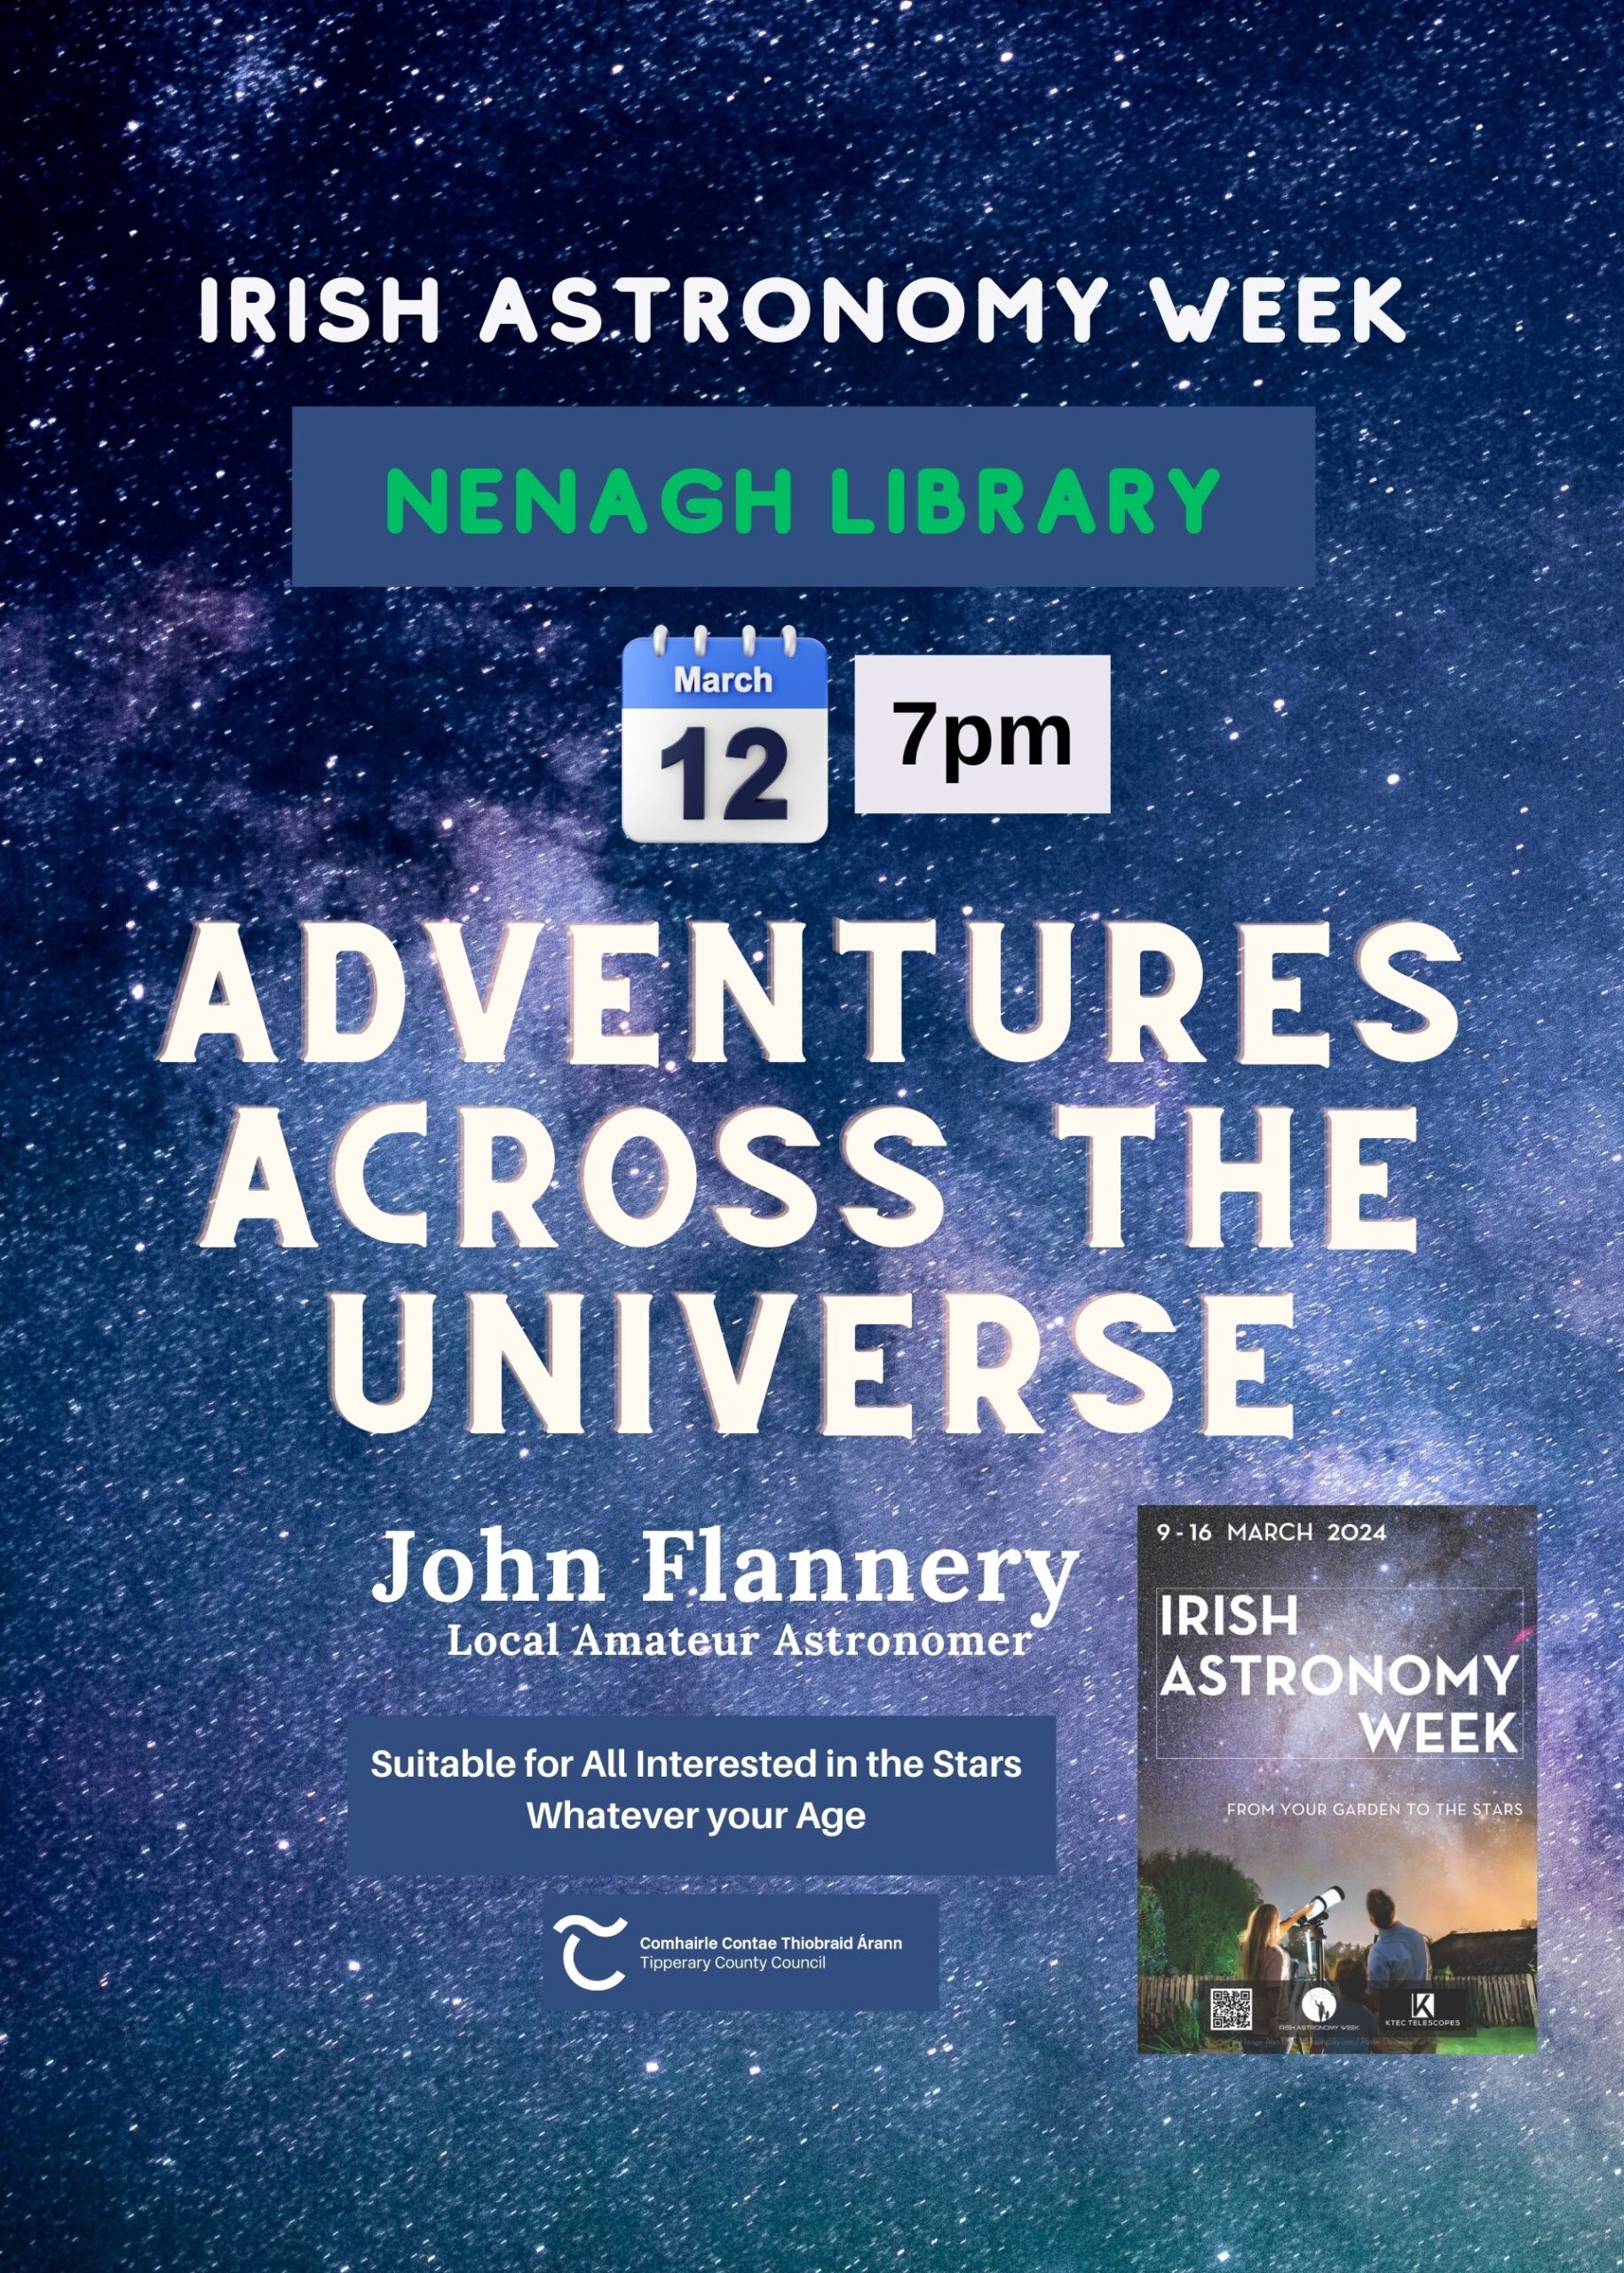 For all budding, seasoned or just simply curious astronomers and star gazers, join John Flannery as he takes us on “ADVENTURES ACROSS THE UNIVERSE” March 12th at 7pm in Nenagh Library. Celebrate Irish Astronomy Week: “From your Garden to the Stars”.